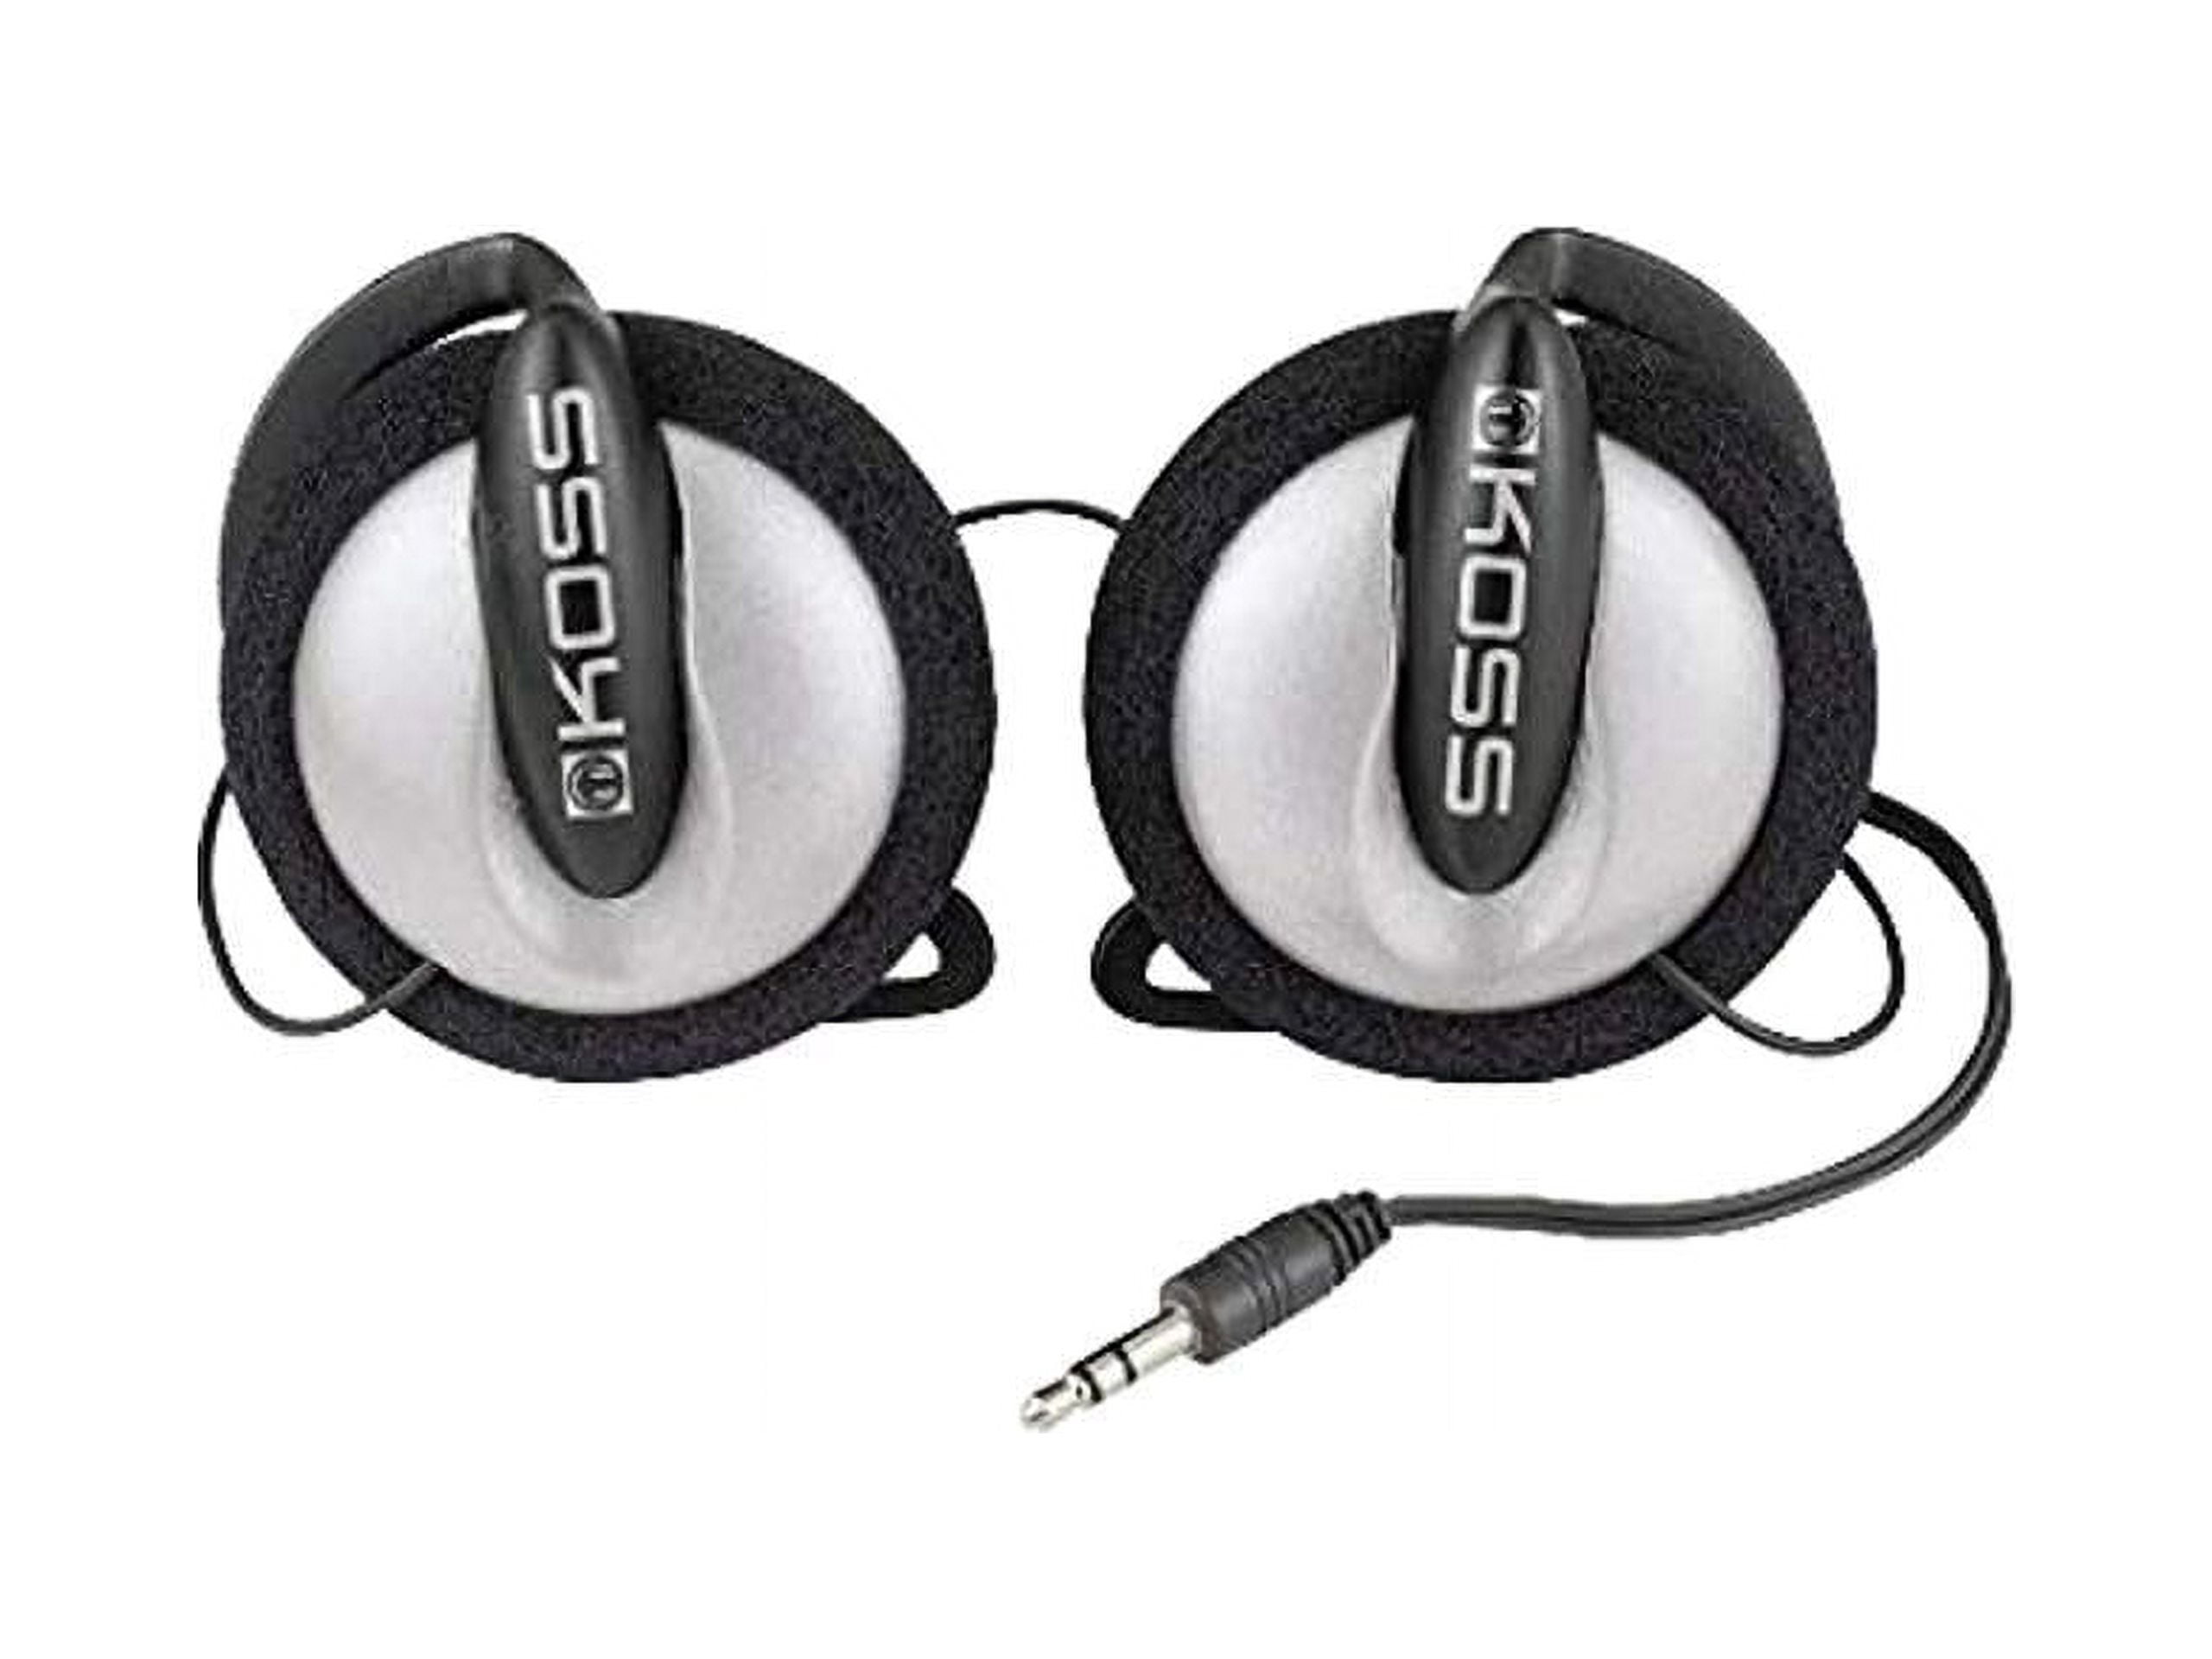 The four types of headphones used. (a) fully open headphones, Koss